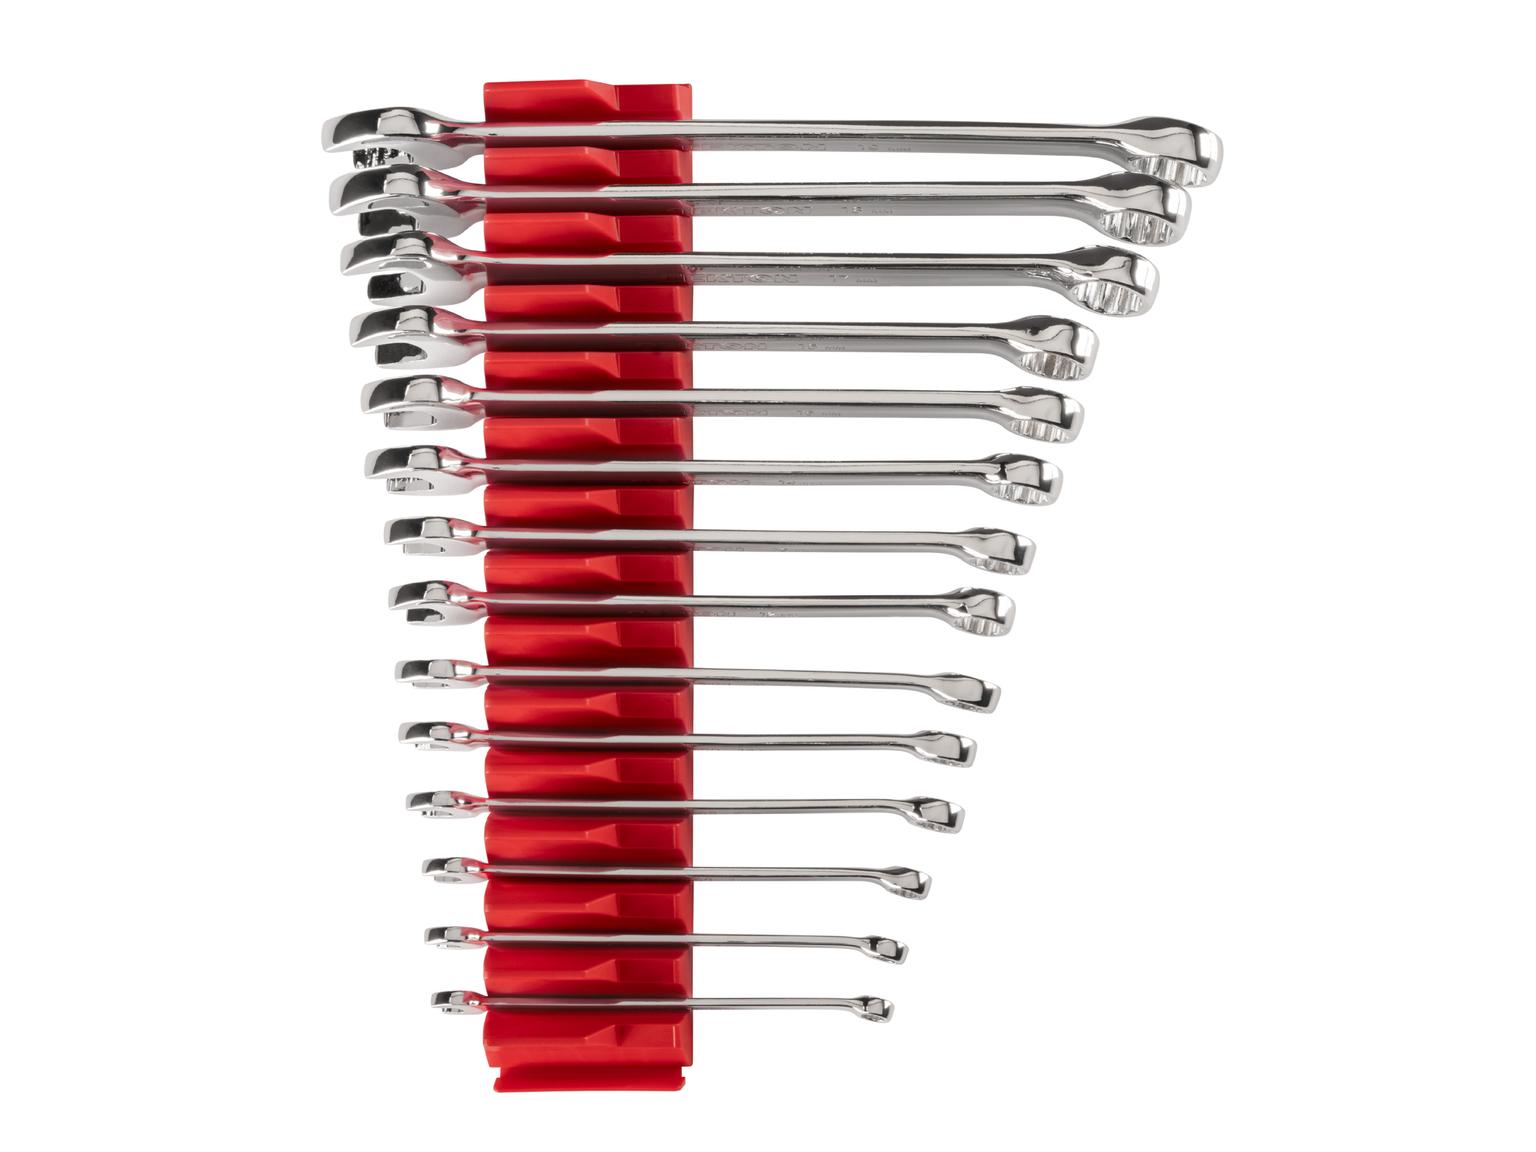 TEKTON WCB95201-T Combination Wrench Set with Modular Slotted Organizer, 14-Piece (6 - 19 mm)